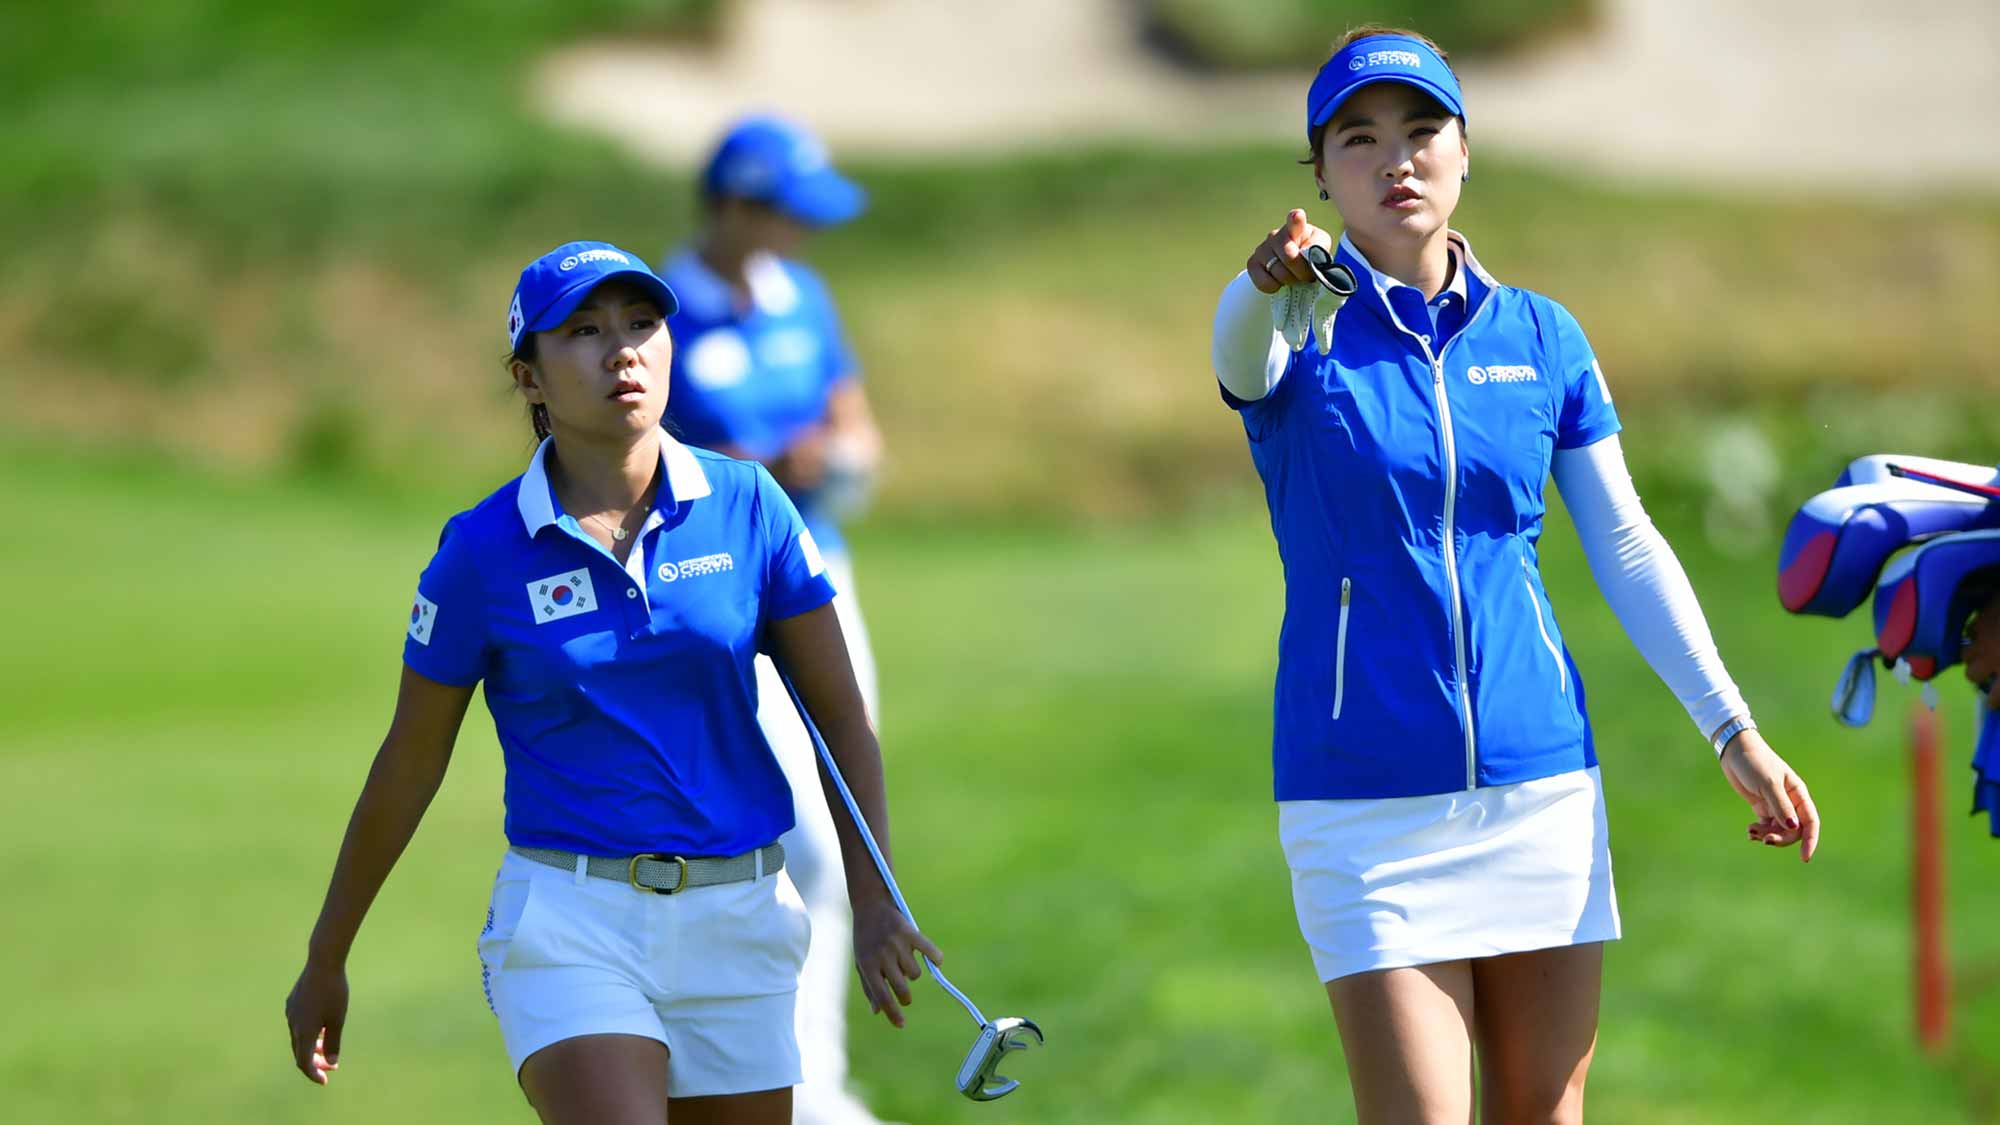 In-Kyung Kim and So Yeon Ryu walk together during the Tuesday practice round at the UL International Crown at Jack Nicklaus Golf Club Korea